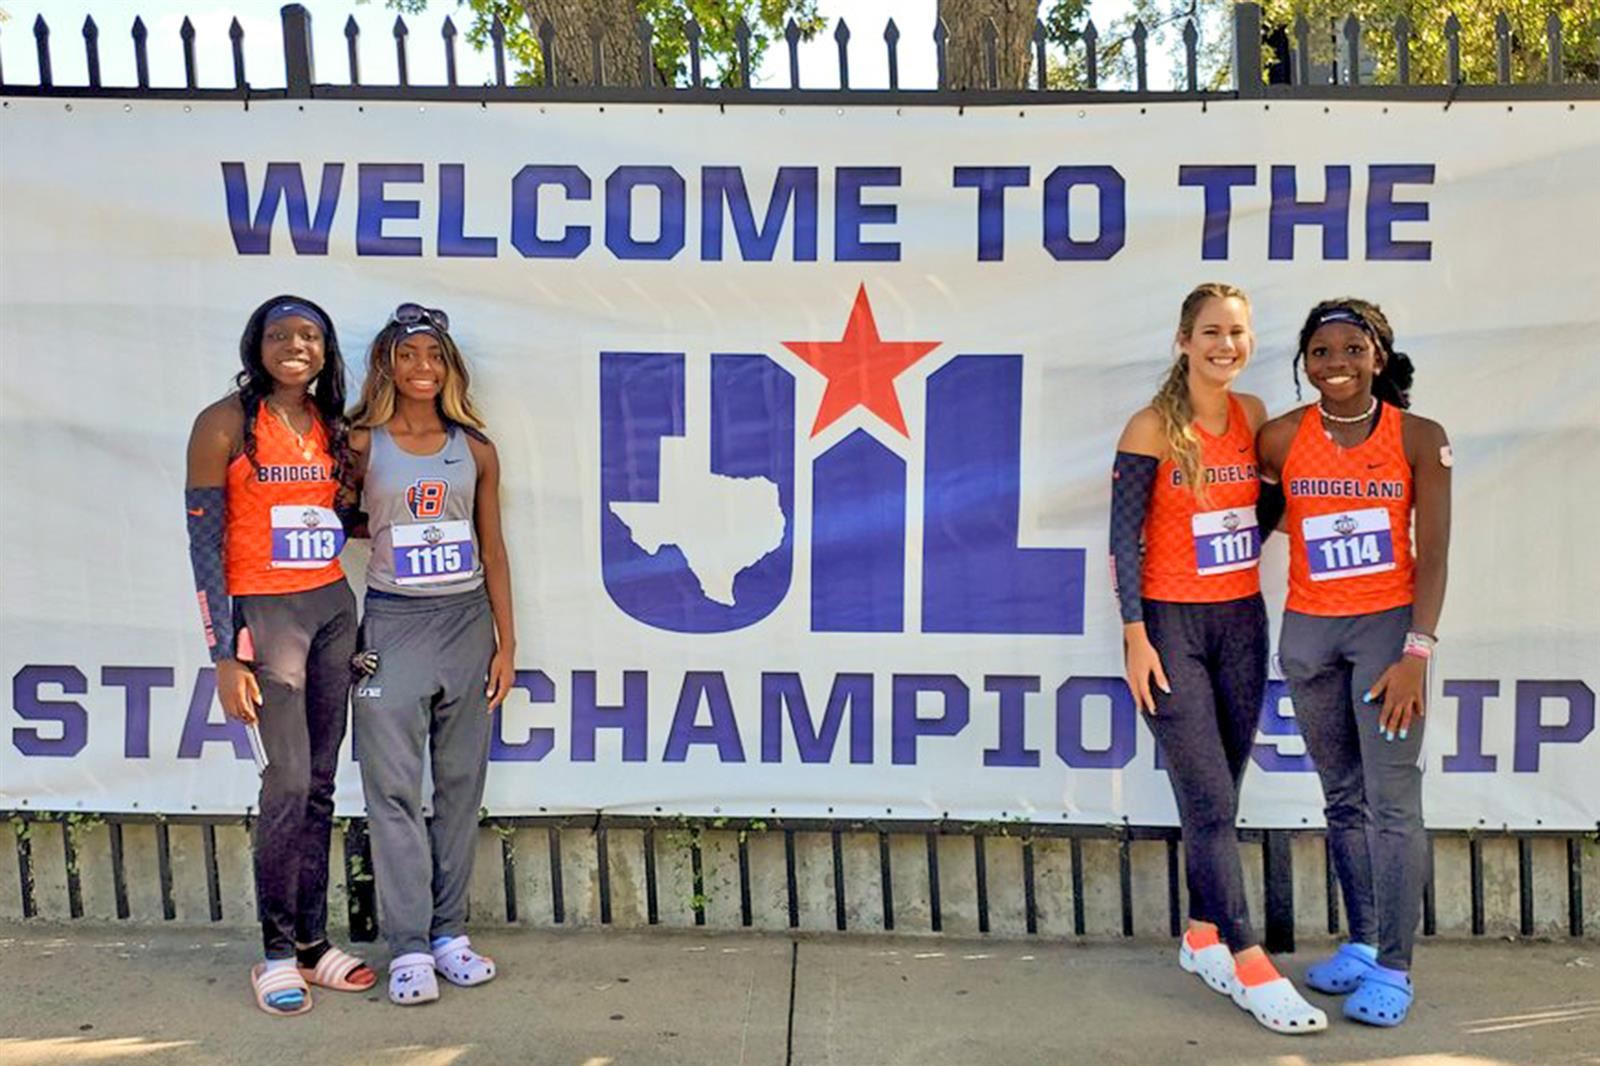 The Bridgeland High School girls’ 4x400-meter team pose before the running session at the state meet.